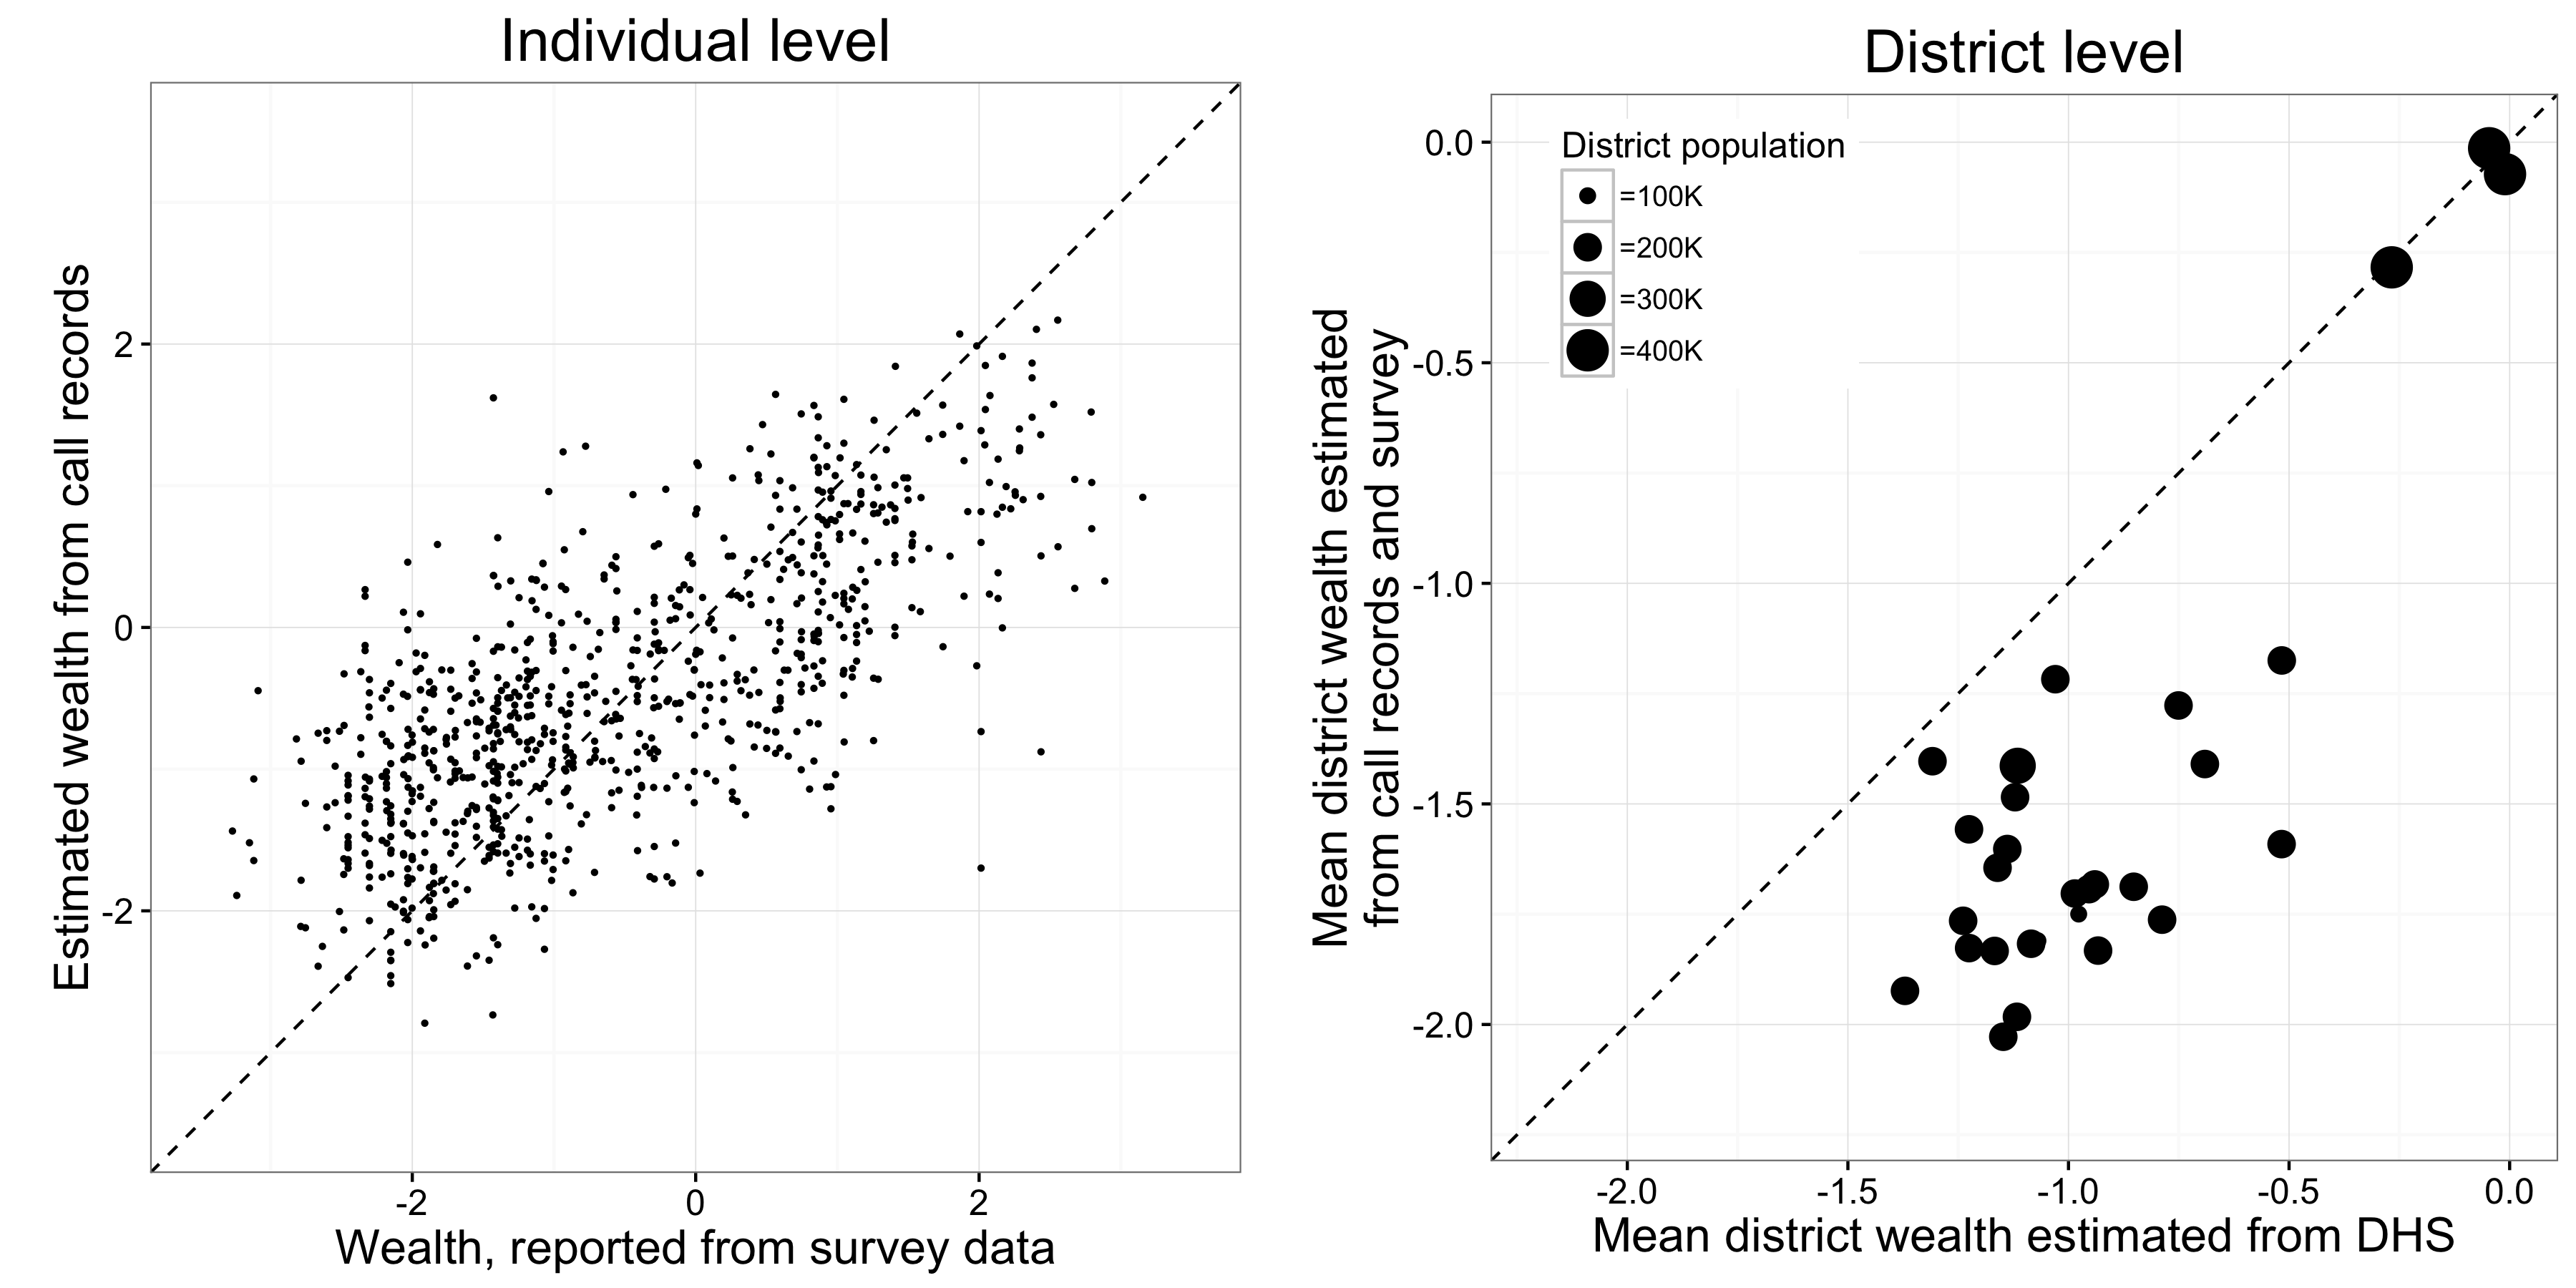 Figure 3.14: Results from Blumenstock, Cadamuro, and On (2015). At the individual-level, the researchers were able to do a reasonable job at predicting someone’s wealth from their call records. The estimates of district-level wealth—which were based on individual-level estimates of wealth and place of residence—the results were similar to results from the Demographic and Health Survey, a gold-standard traditional survey.